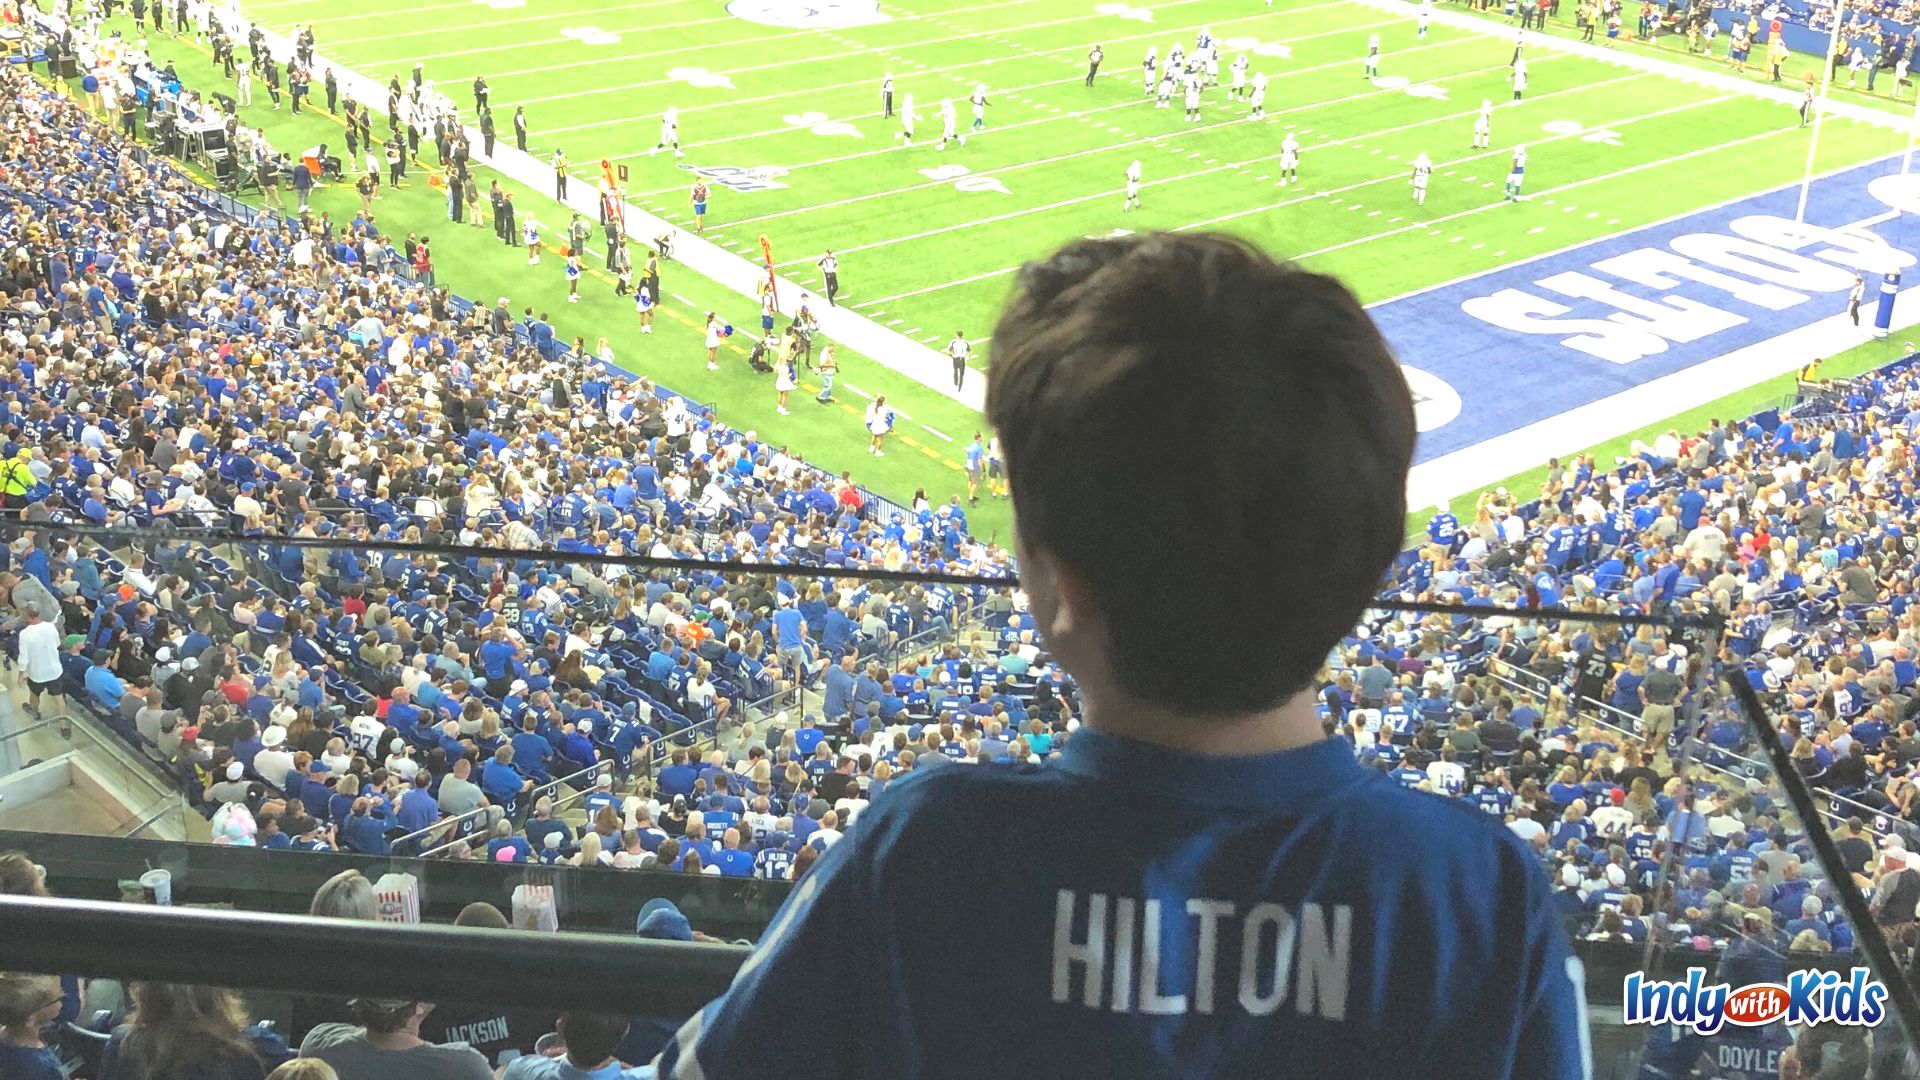 Football Games with Kids: Share the fun of cheering on the Colts with your kids!